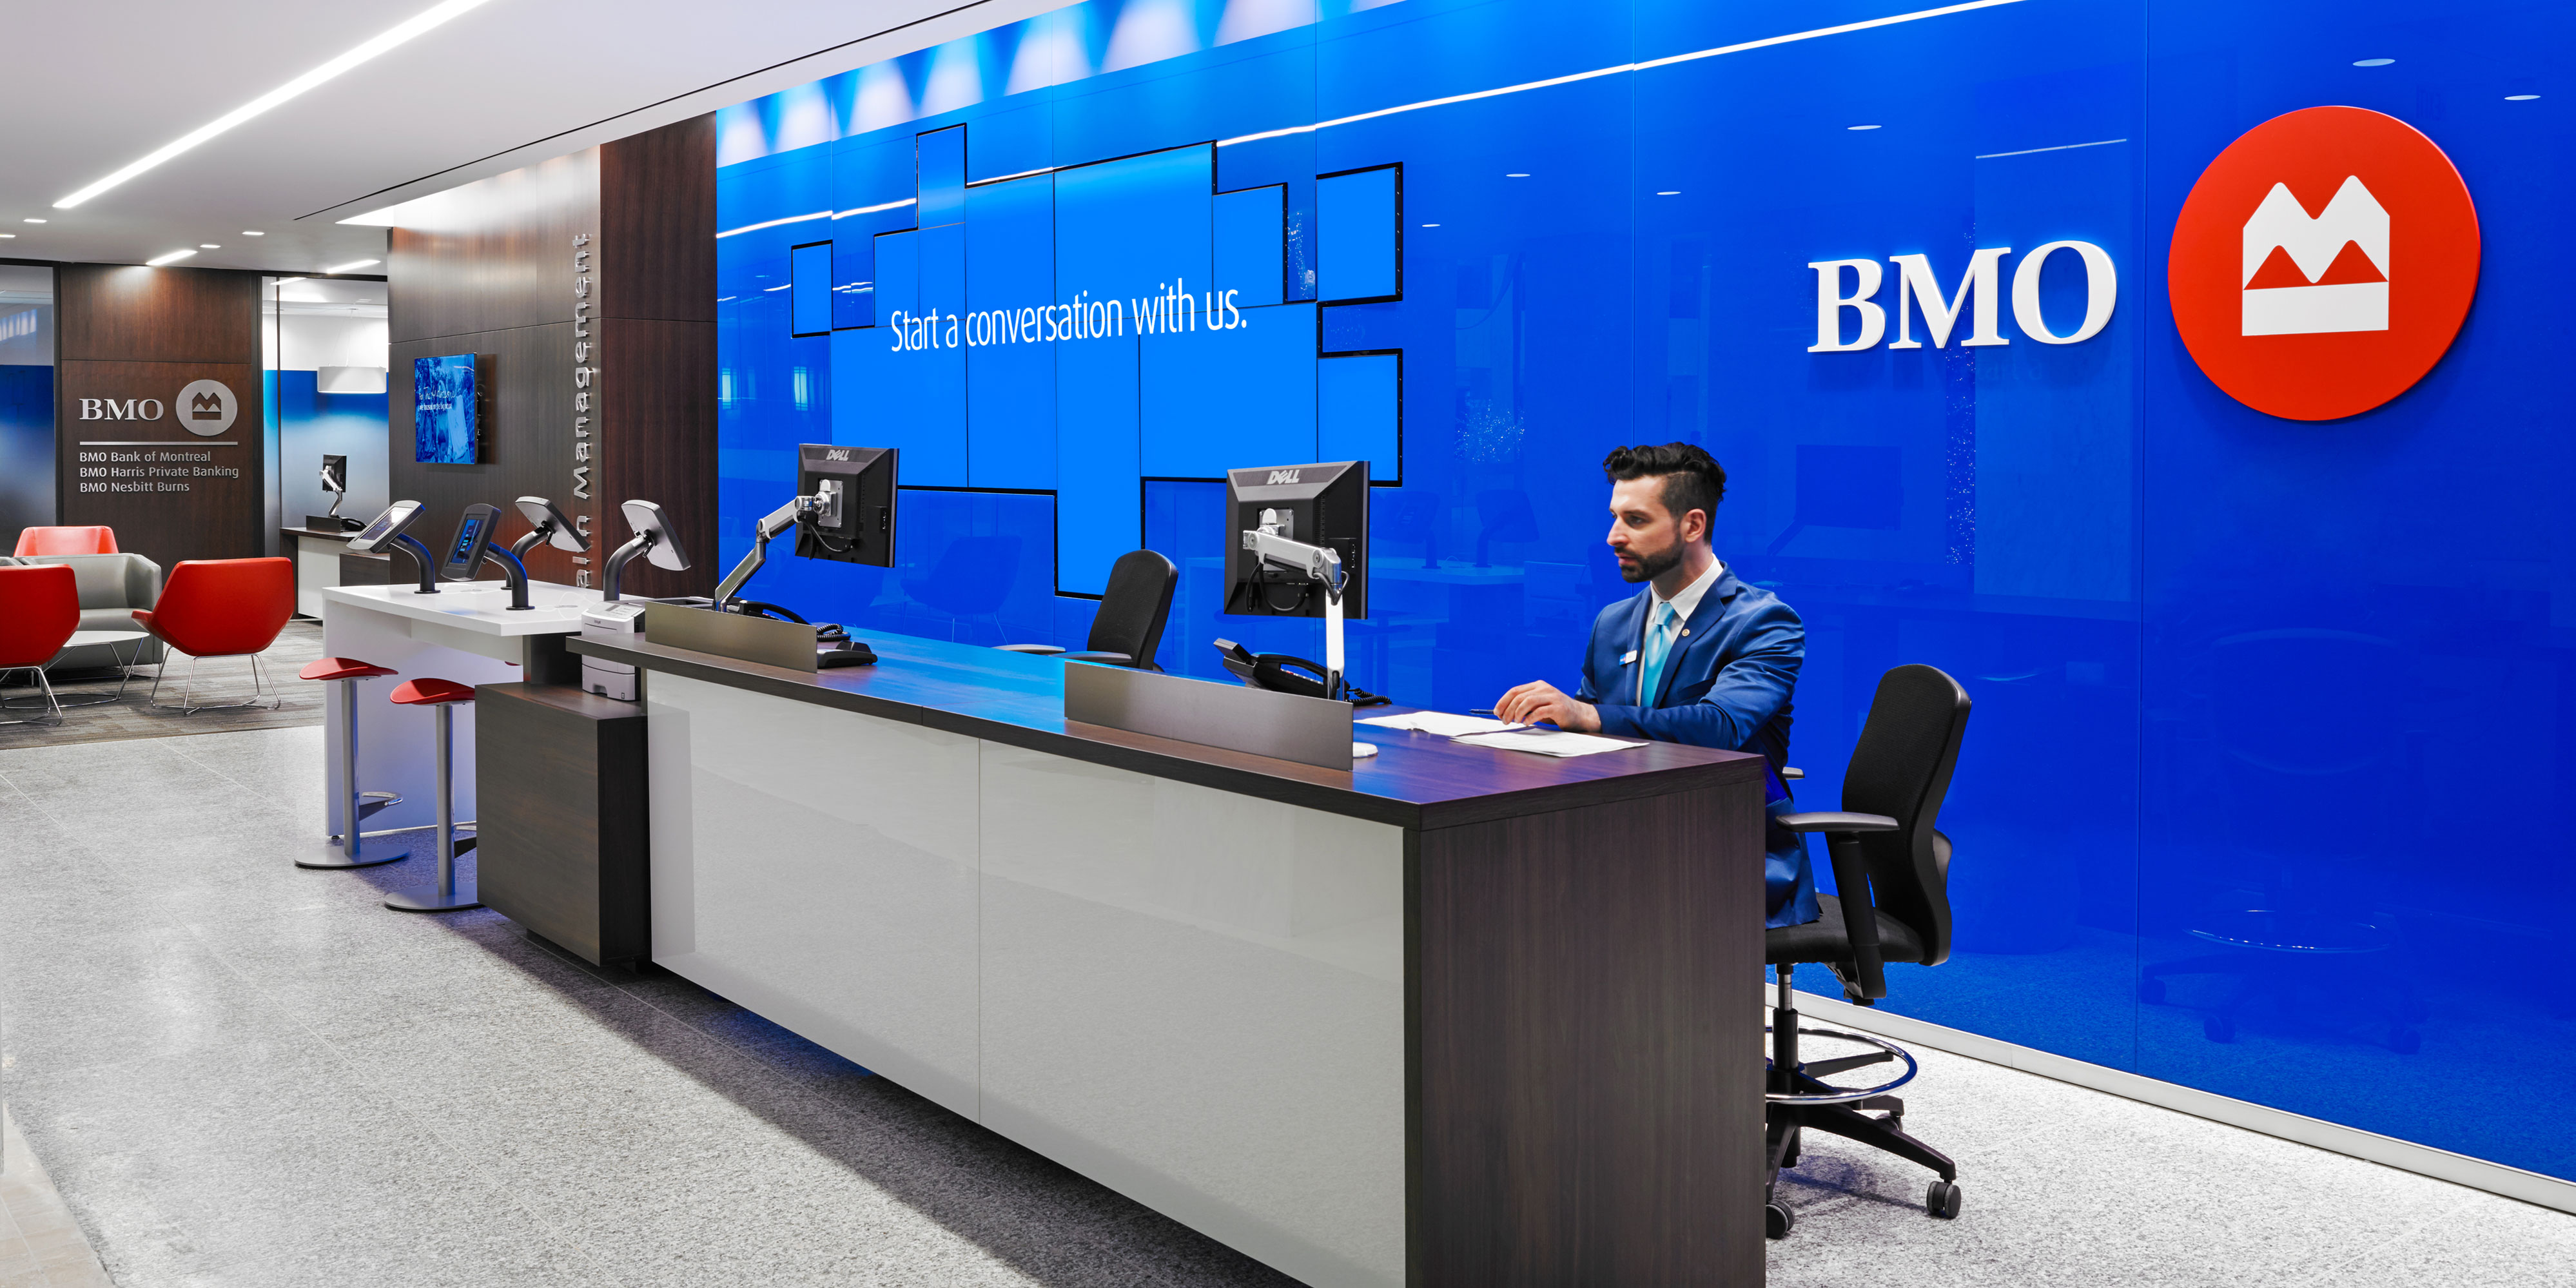 Corporate Knights Names BMO North America's Most Sustainable Bank for Fourth Consecutive Year